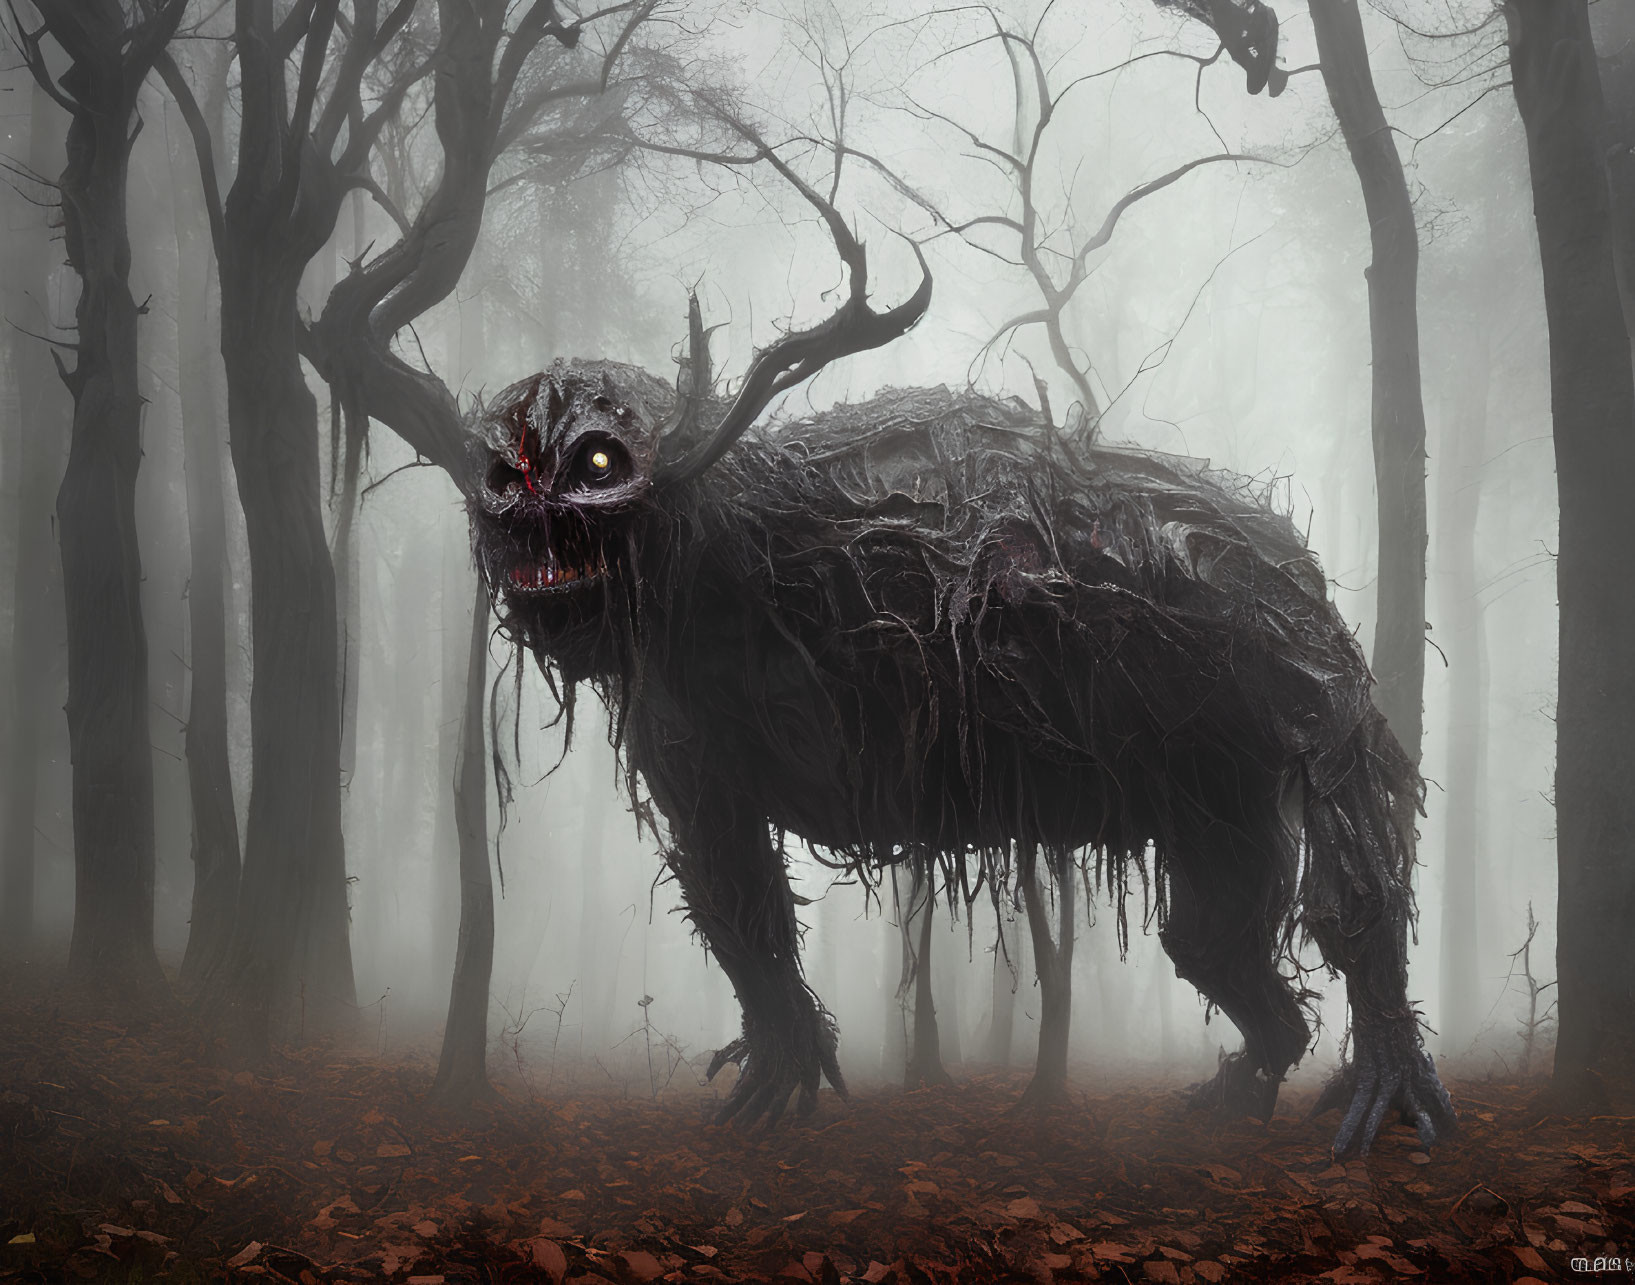 Menacing beast-like creature with glowing red eyes in foggy forest